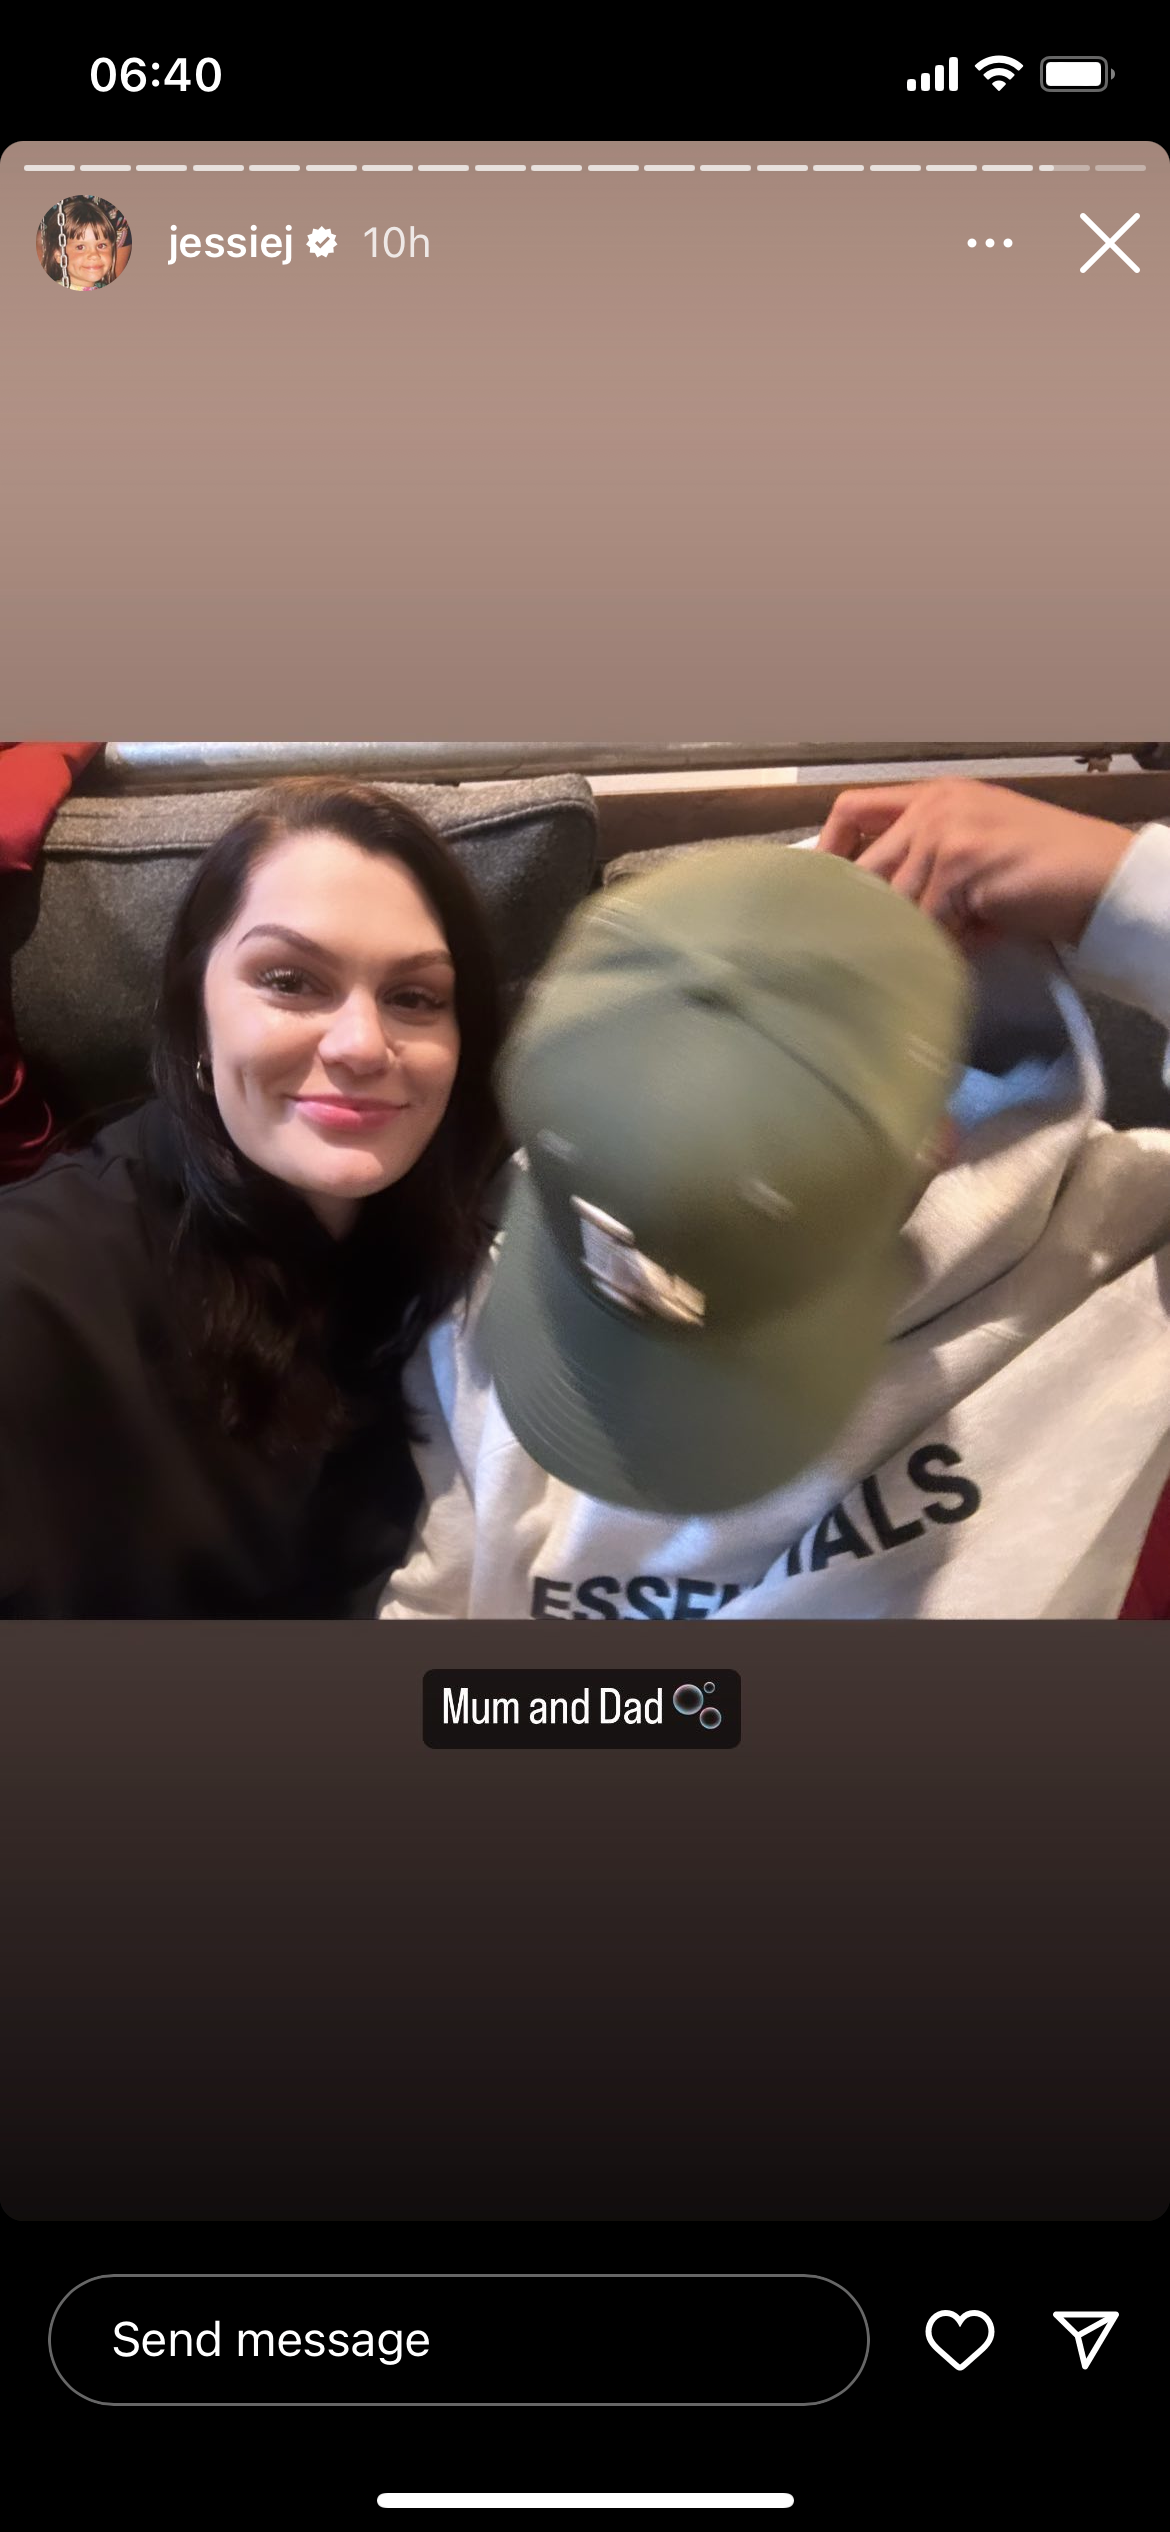 Jessie J gushes about her baby daddy